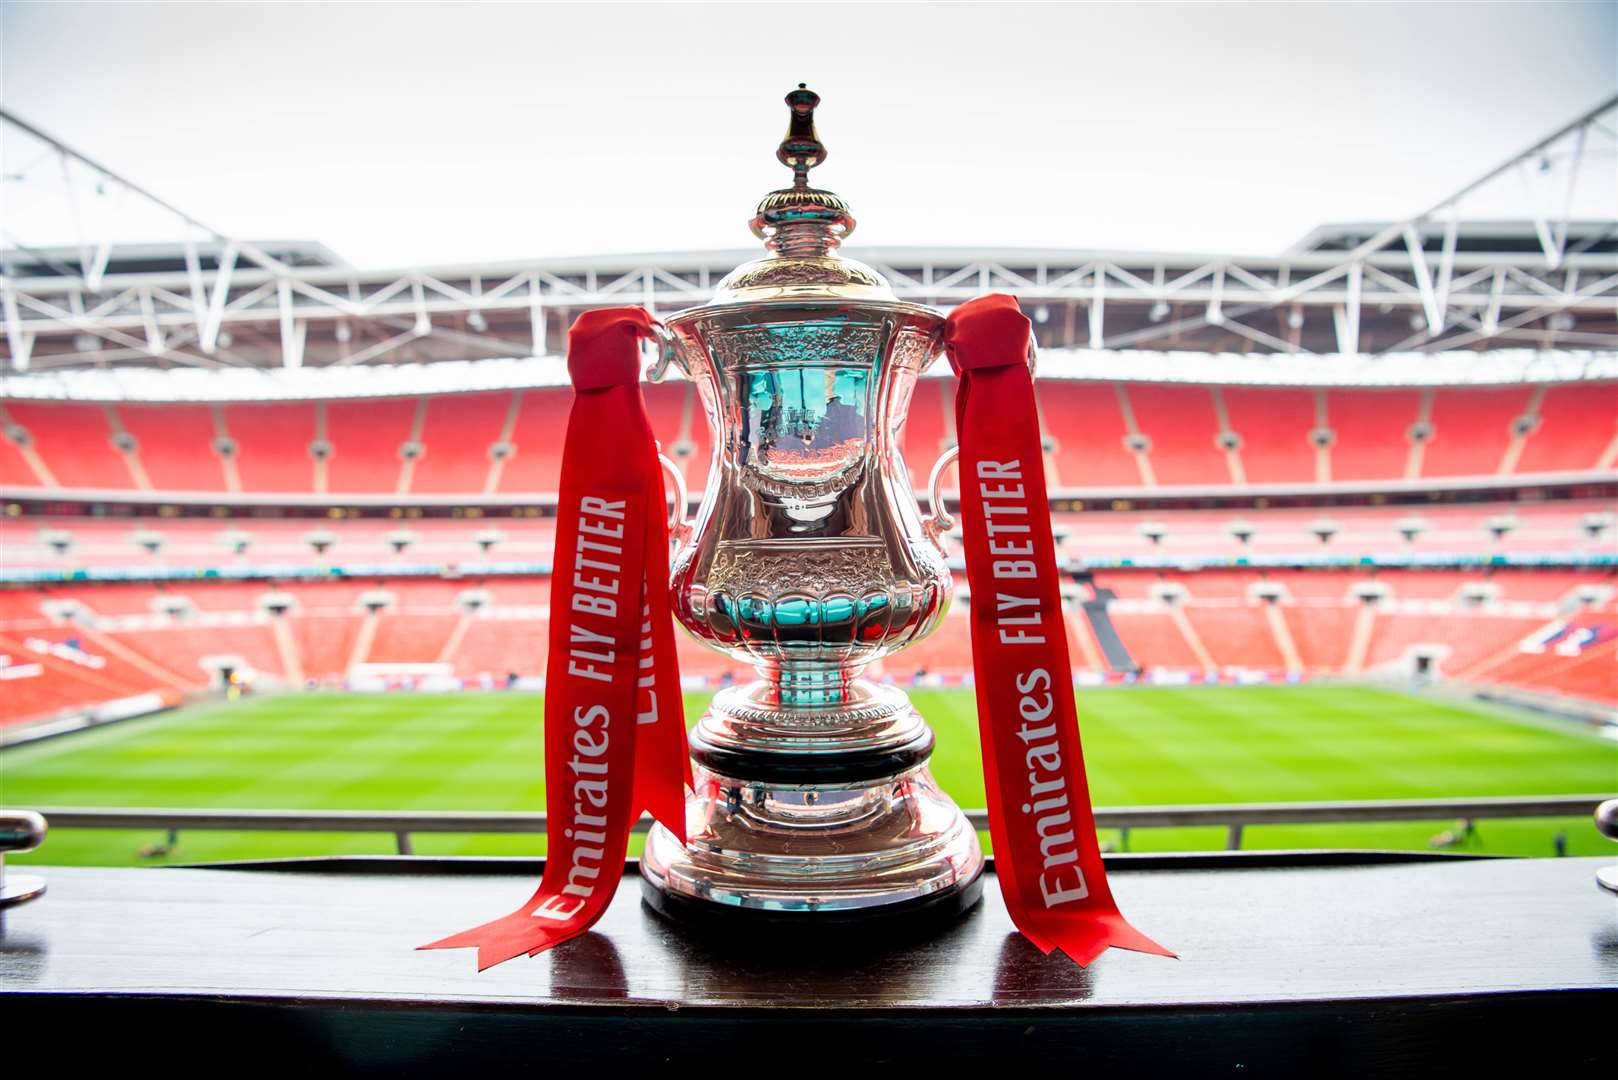 The road to Wembley has reached the First Round stage in this season’s FA Cup. Picture: FA